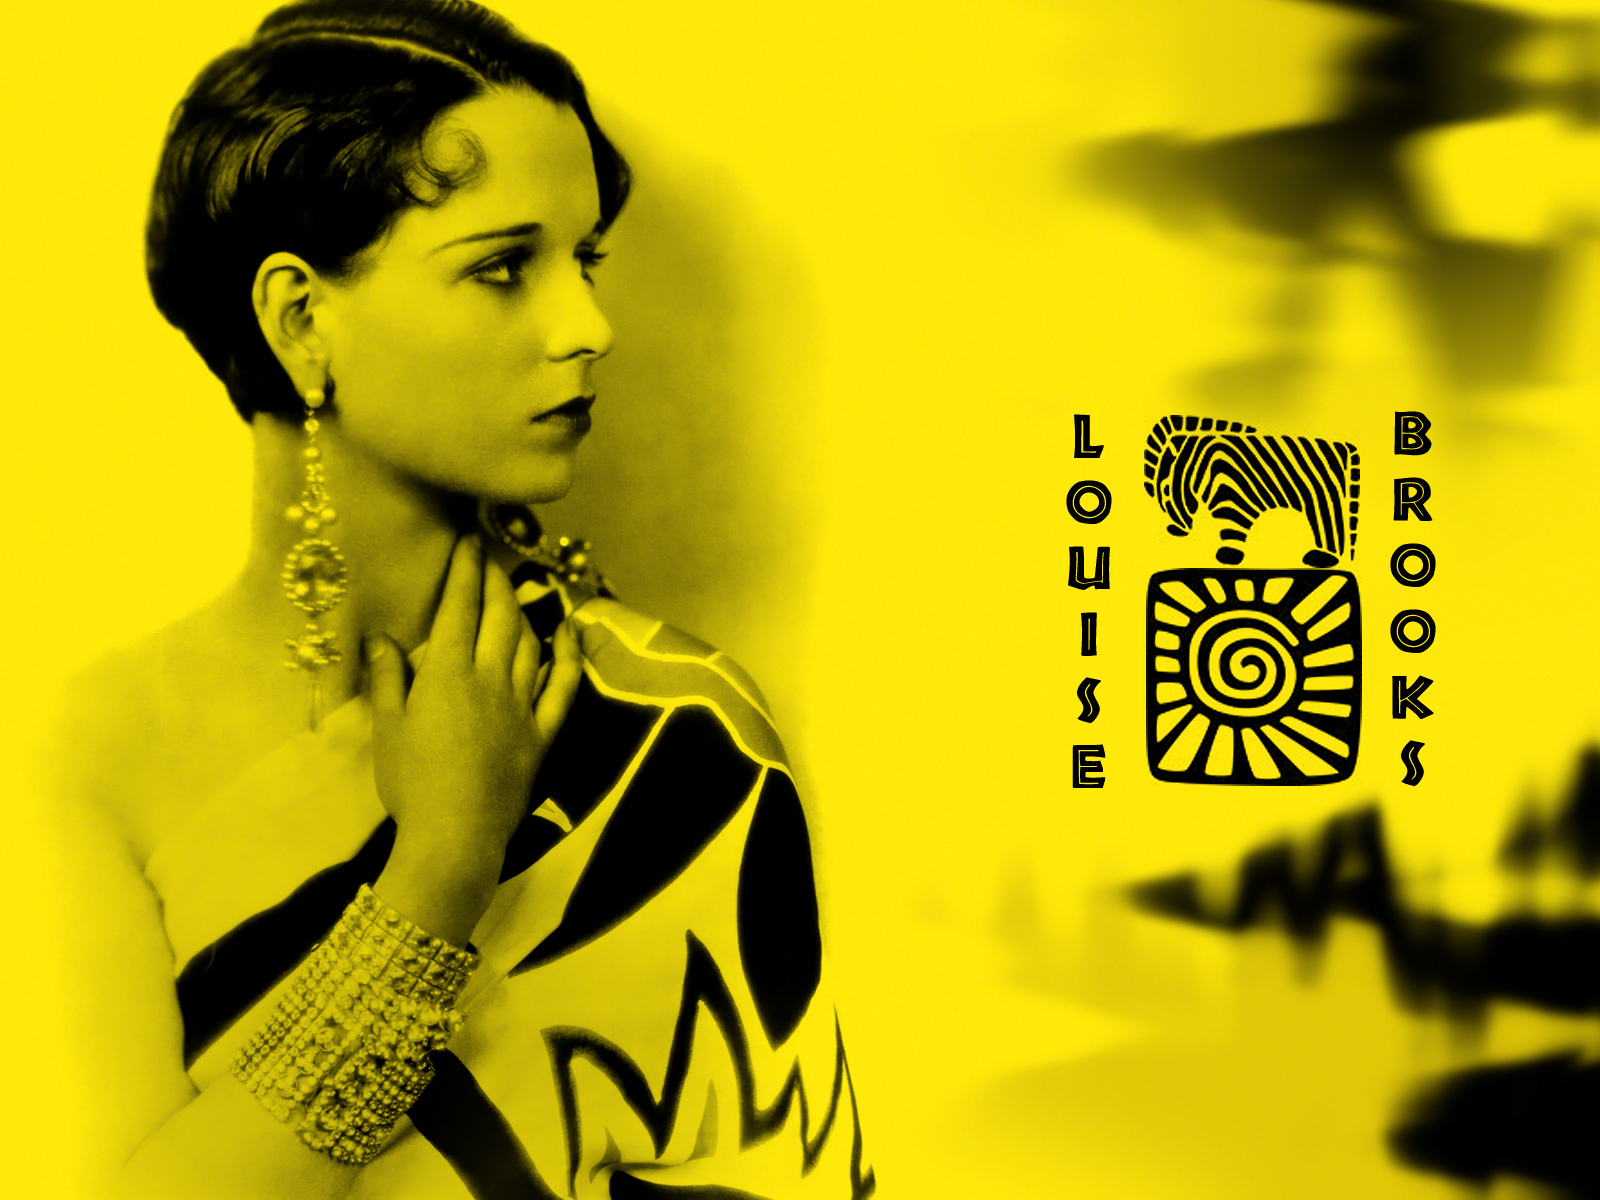 Wallpaper of Louise Brooks for fans of Louise Brooks. made by Sylvie.